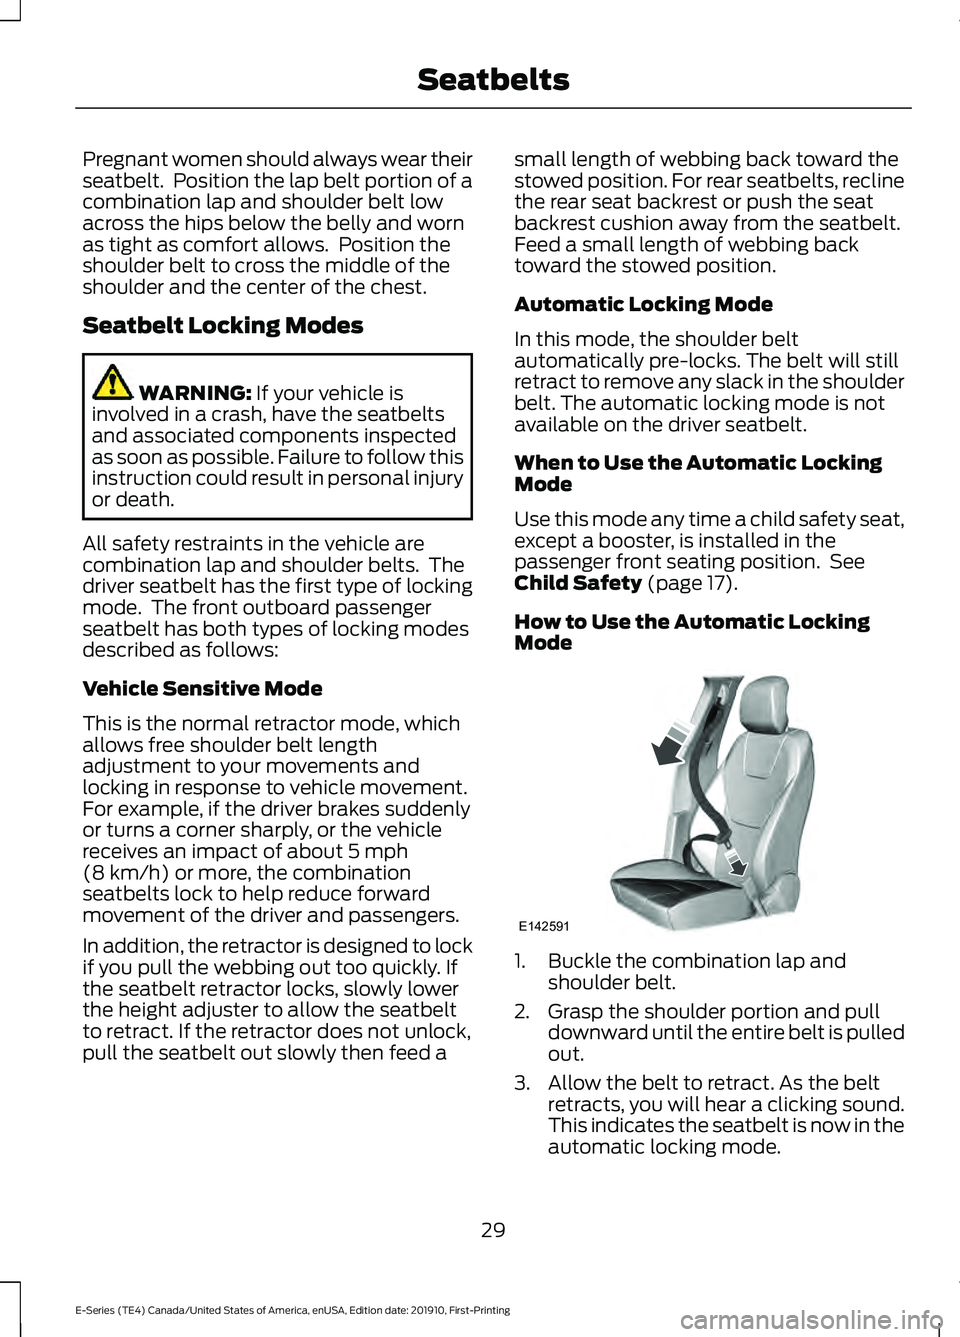 FORD E-450 2021  Owners Manual Pregnant women should always wear their
seatbelt.  Position the lap belt portion of a
combination lap and shoulder belt low
across the hips below the belly and worn
as tight as comfort allows.  Positi